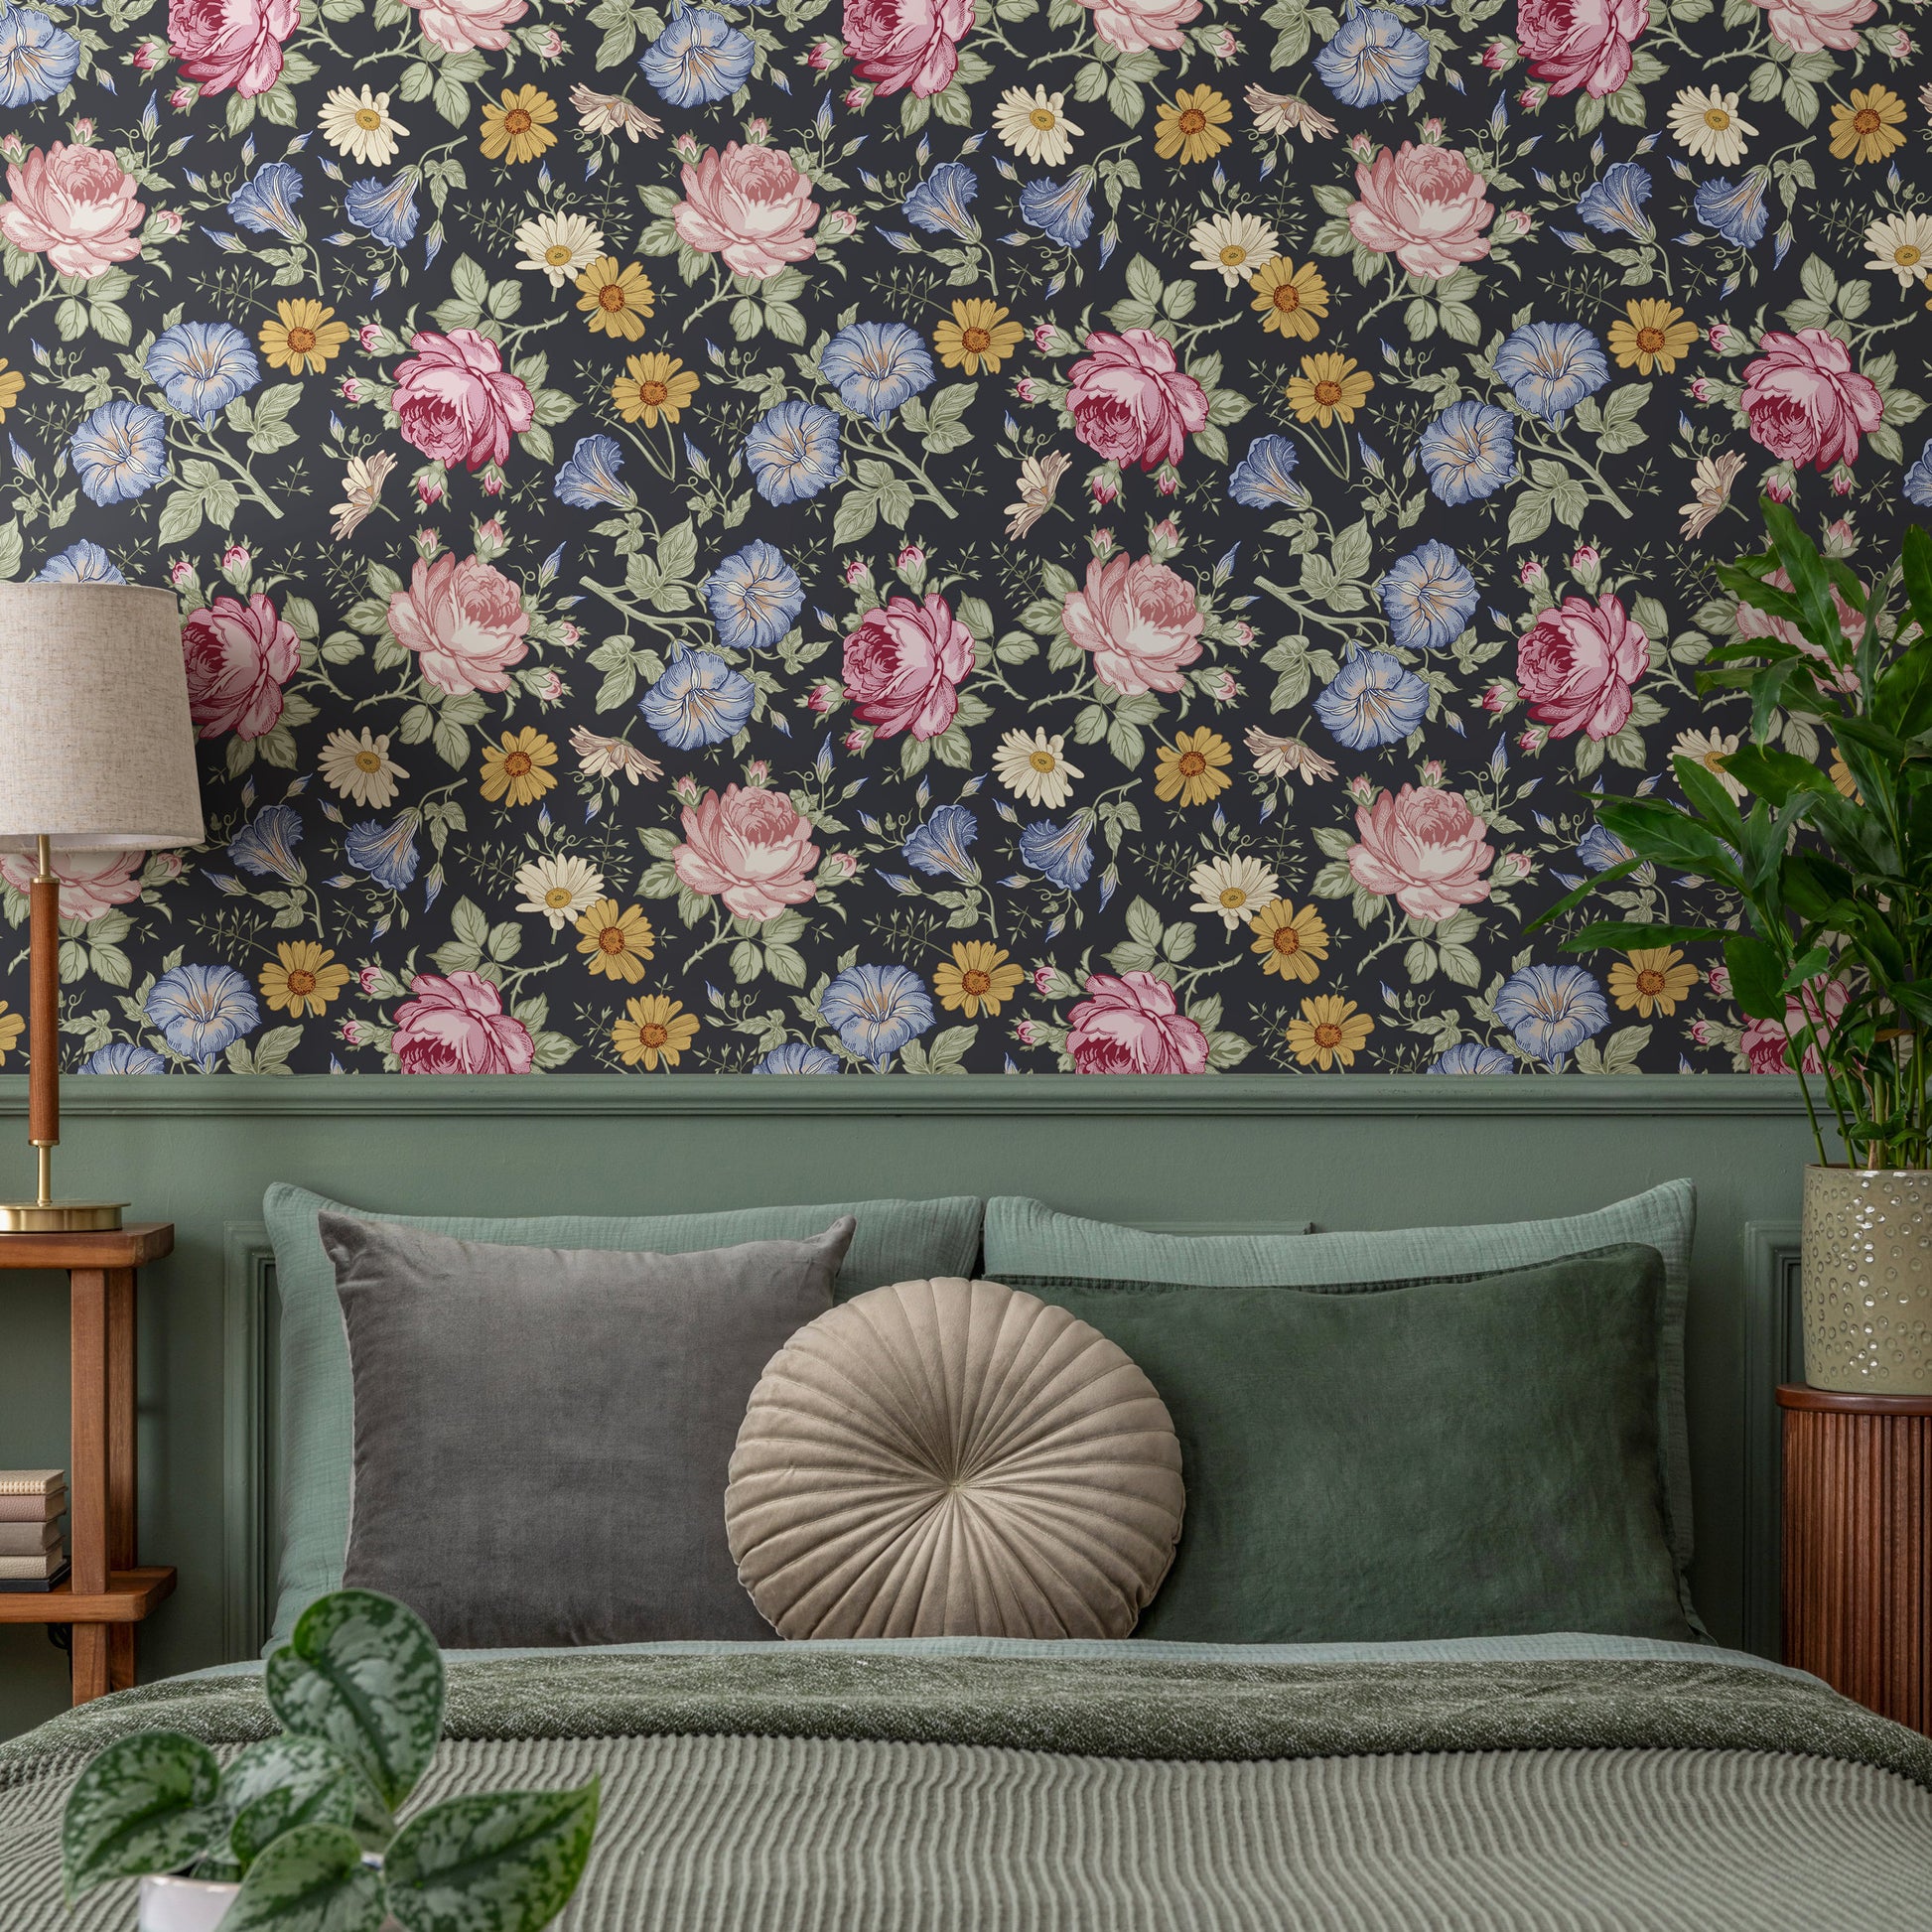 Flower Wallpaper - Removable Wallpaper Peel and Stick Wallpaper Wall Paper Wall Mural - B261